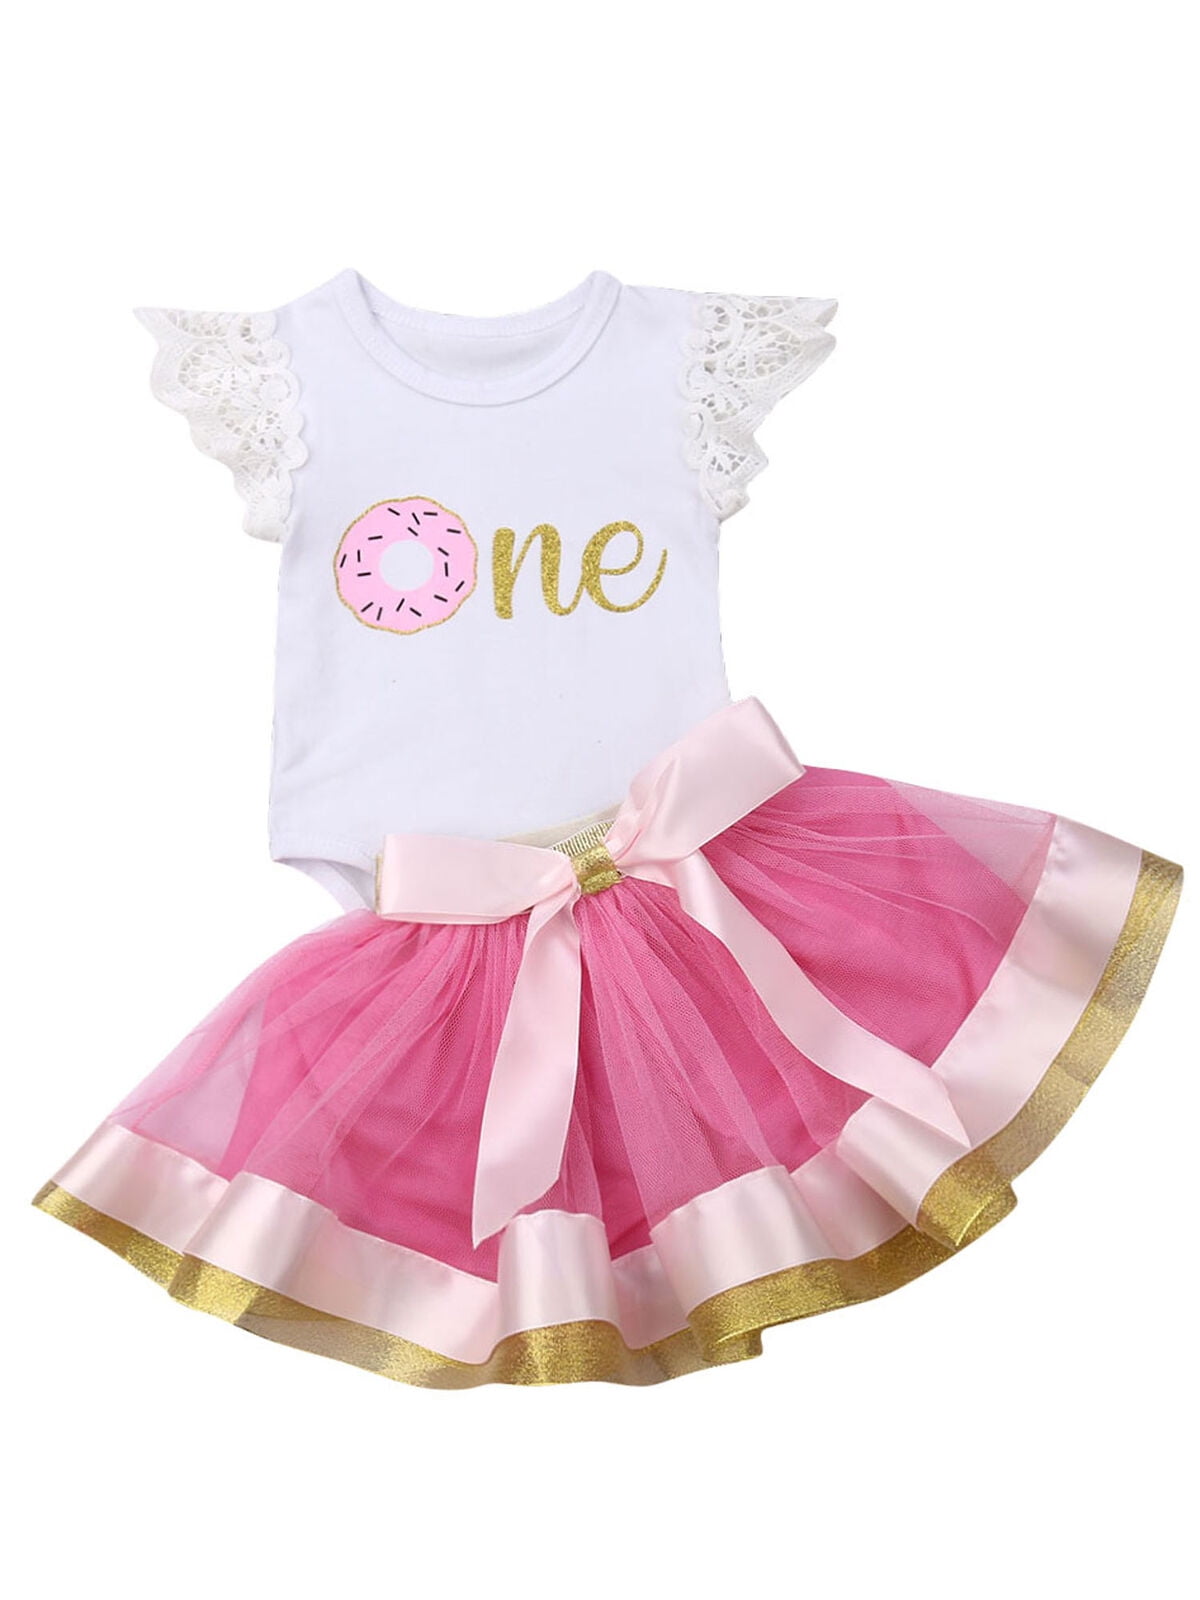 Romper Tops Tutu Skirt Birthday Party Dress Outfits Baby Girls Jumpsuit Clothes 